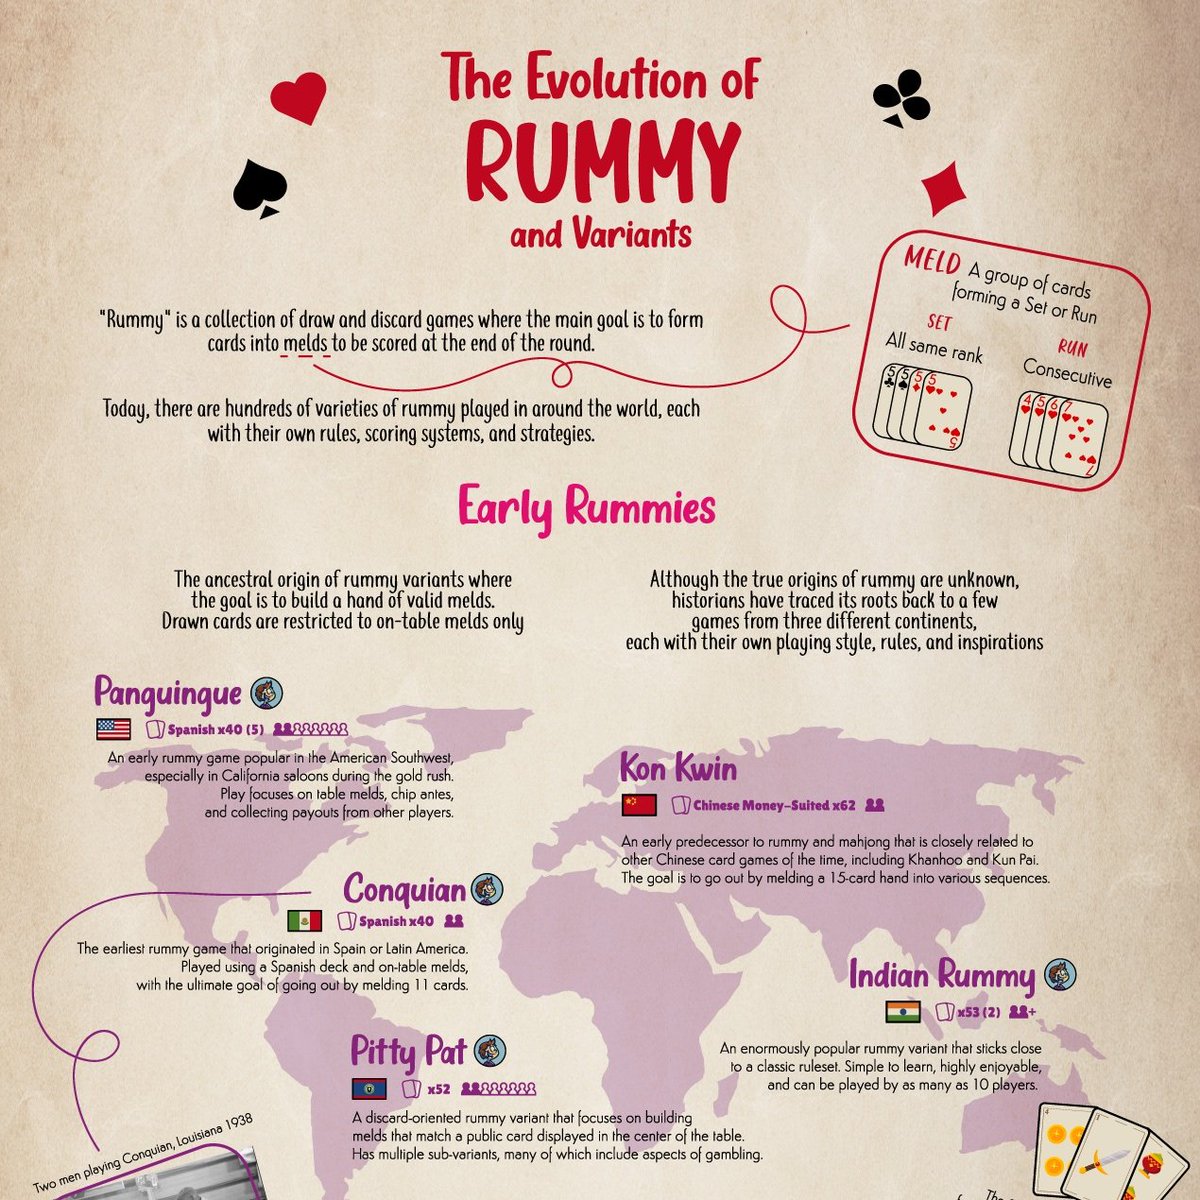 Rummy Roots Game